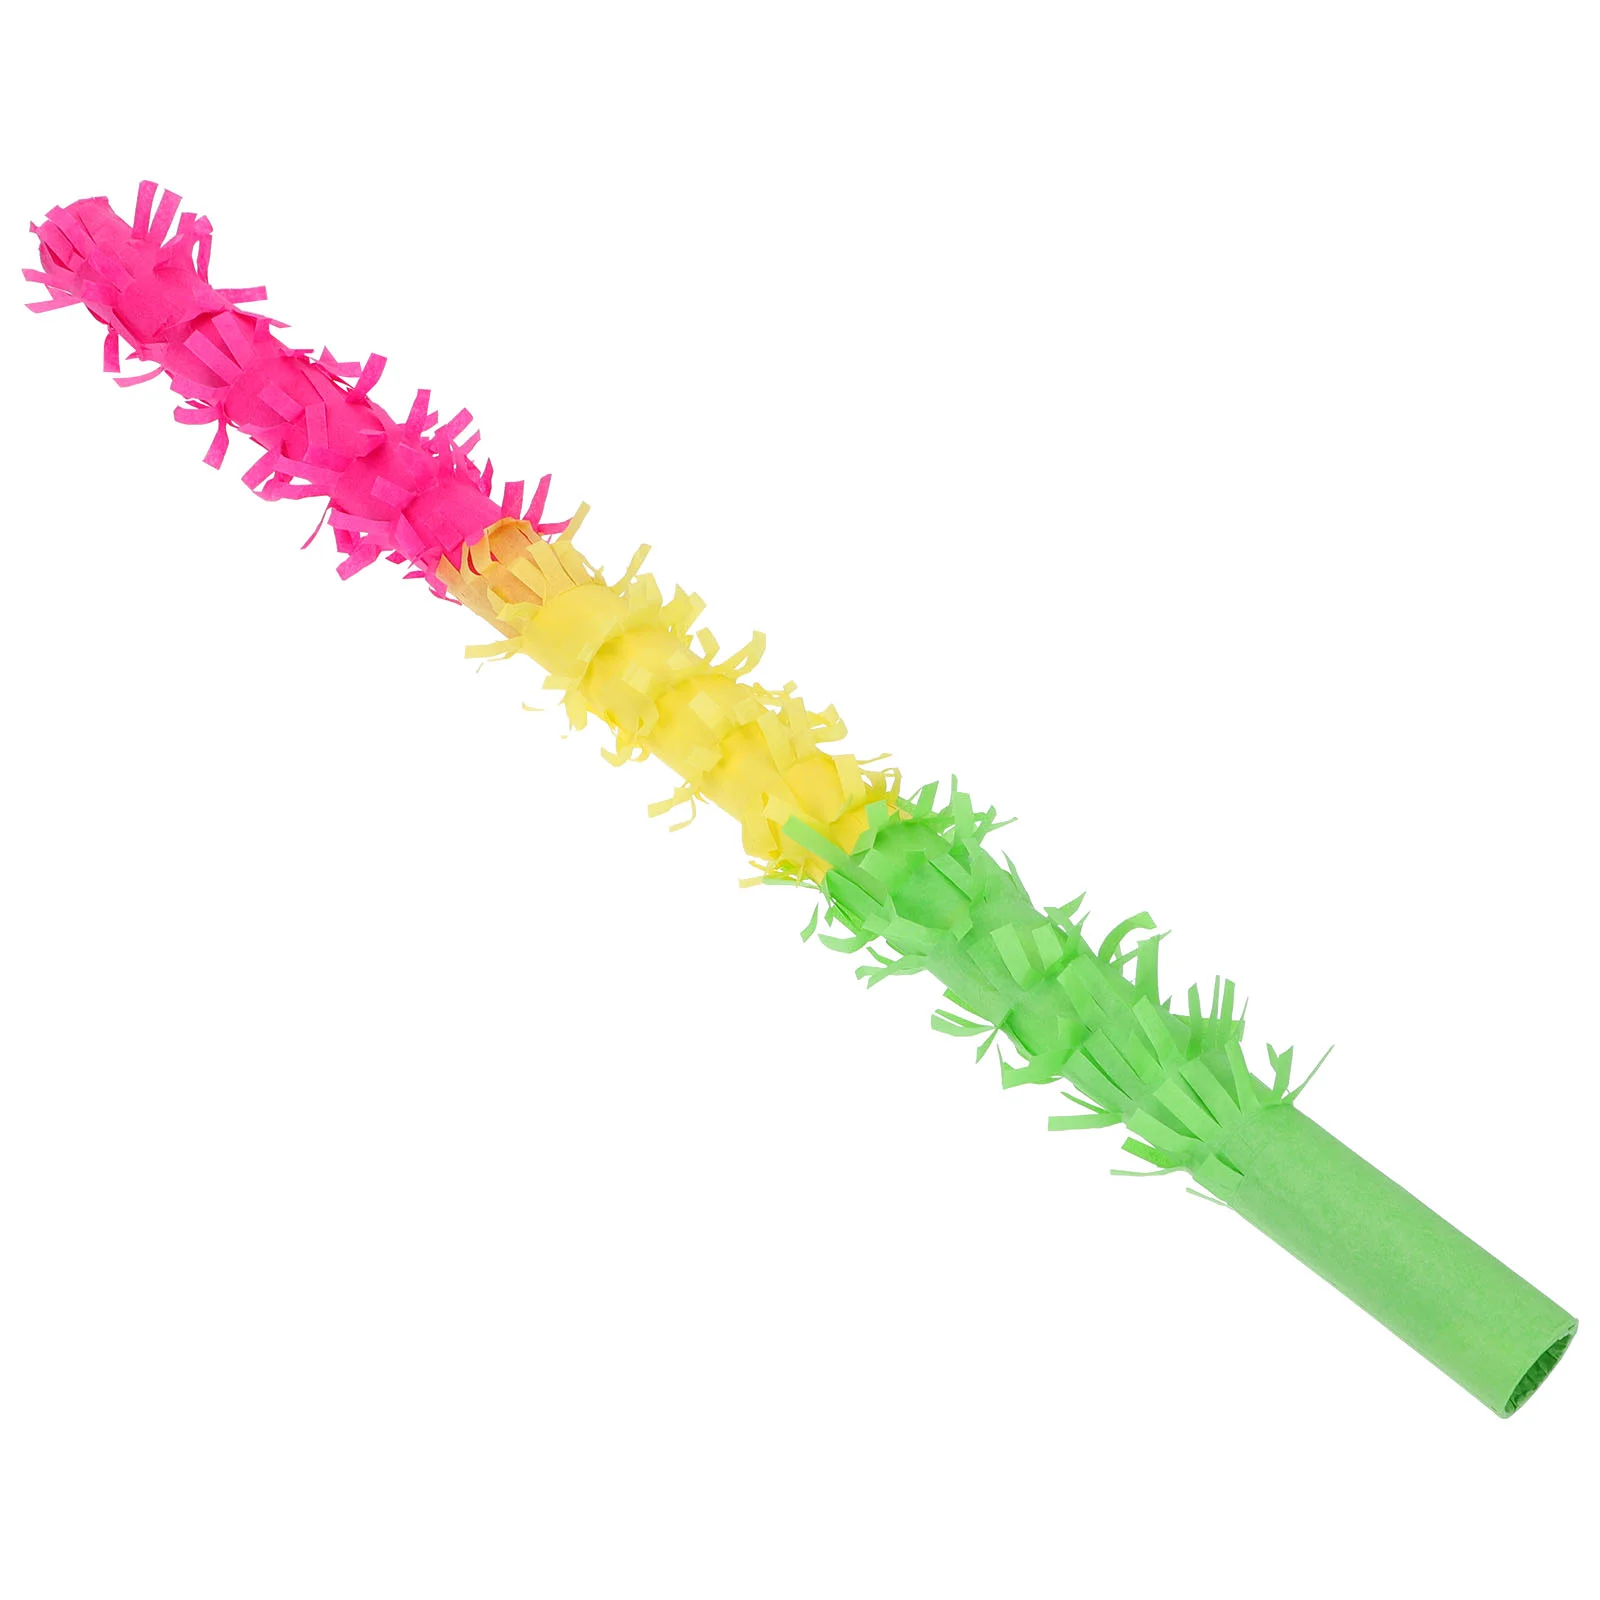 

Pinata Party Stick Noisemakers Birthday Sticks Supplies Paper Cheering Bat Candy Fringe Toy Decorations Shower Baby Favors